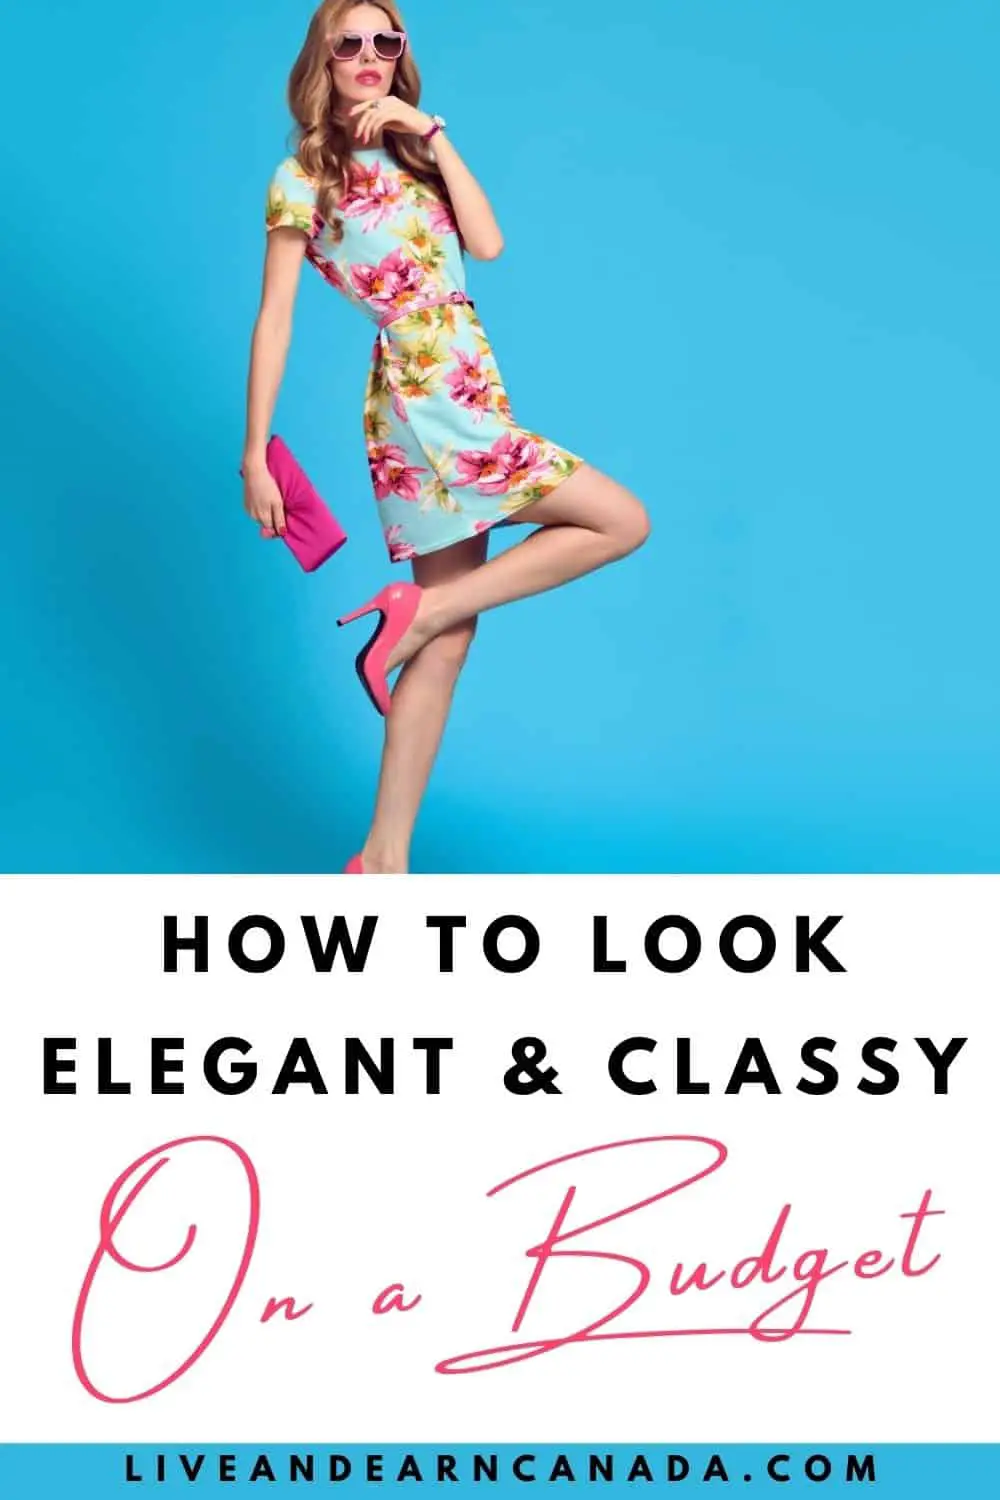 Elegant and classy outfits fashion ideas! How To Look Elegant All The Time Do you want to look elegant and timeless? This world is filled with fast trends, but there's something to be said about an elegant outfit. Now you can have a guide to a classy lifestyle. Click through to read the post on how to look elegant everyday